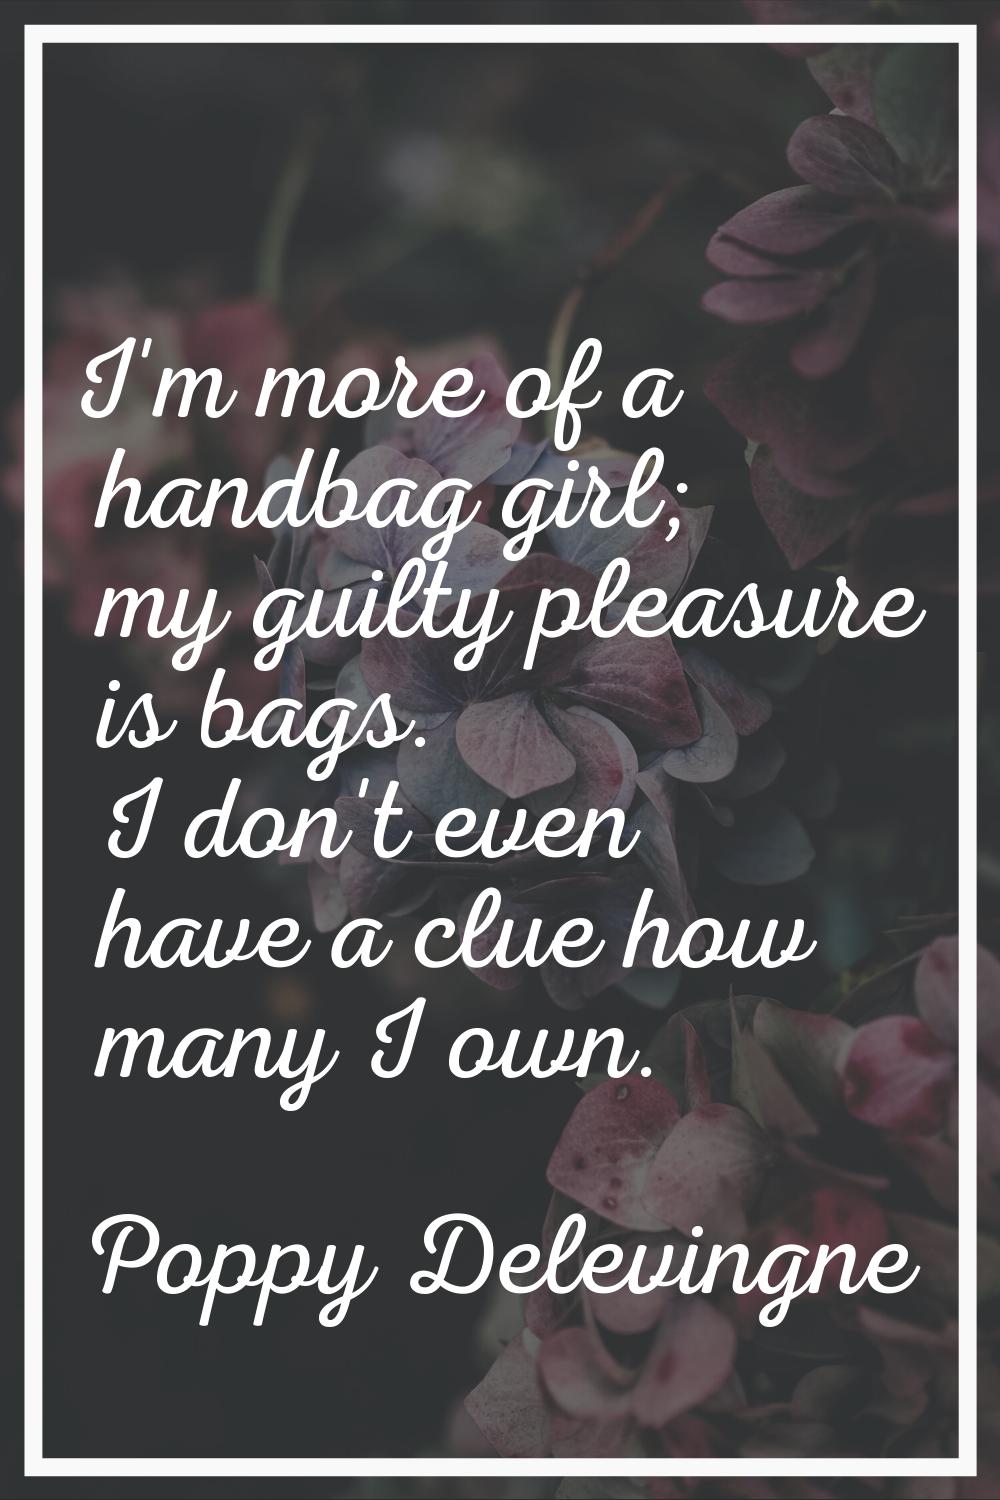 I'm more of a handbag girl; my guilty pleasure is bags. I don't even have a clue how many I own.